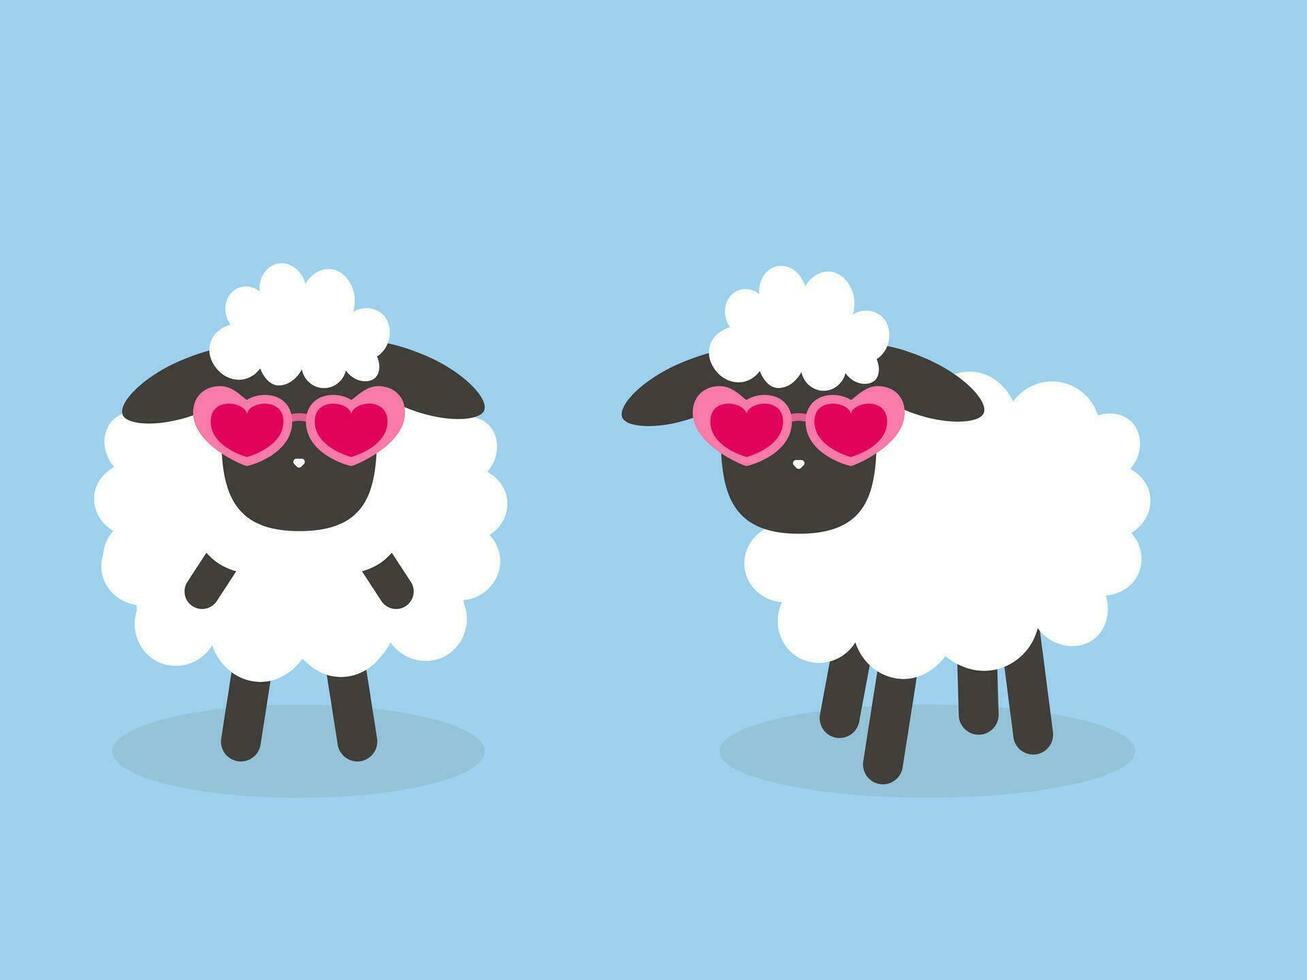 Sheep wearing pink heart shaped glasses. Cartoon drawing vector illustration on blue background